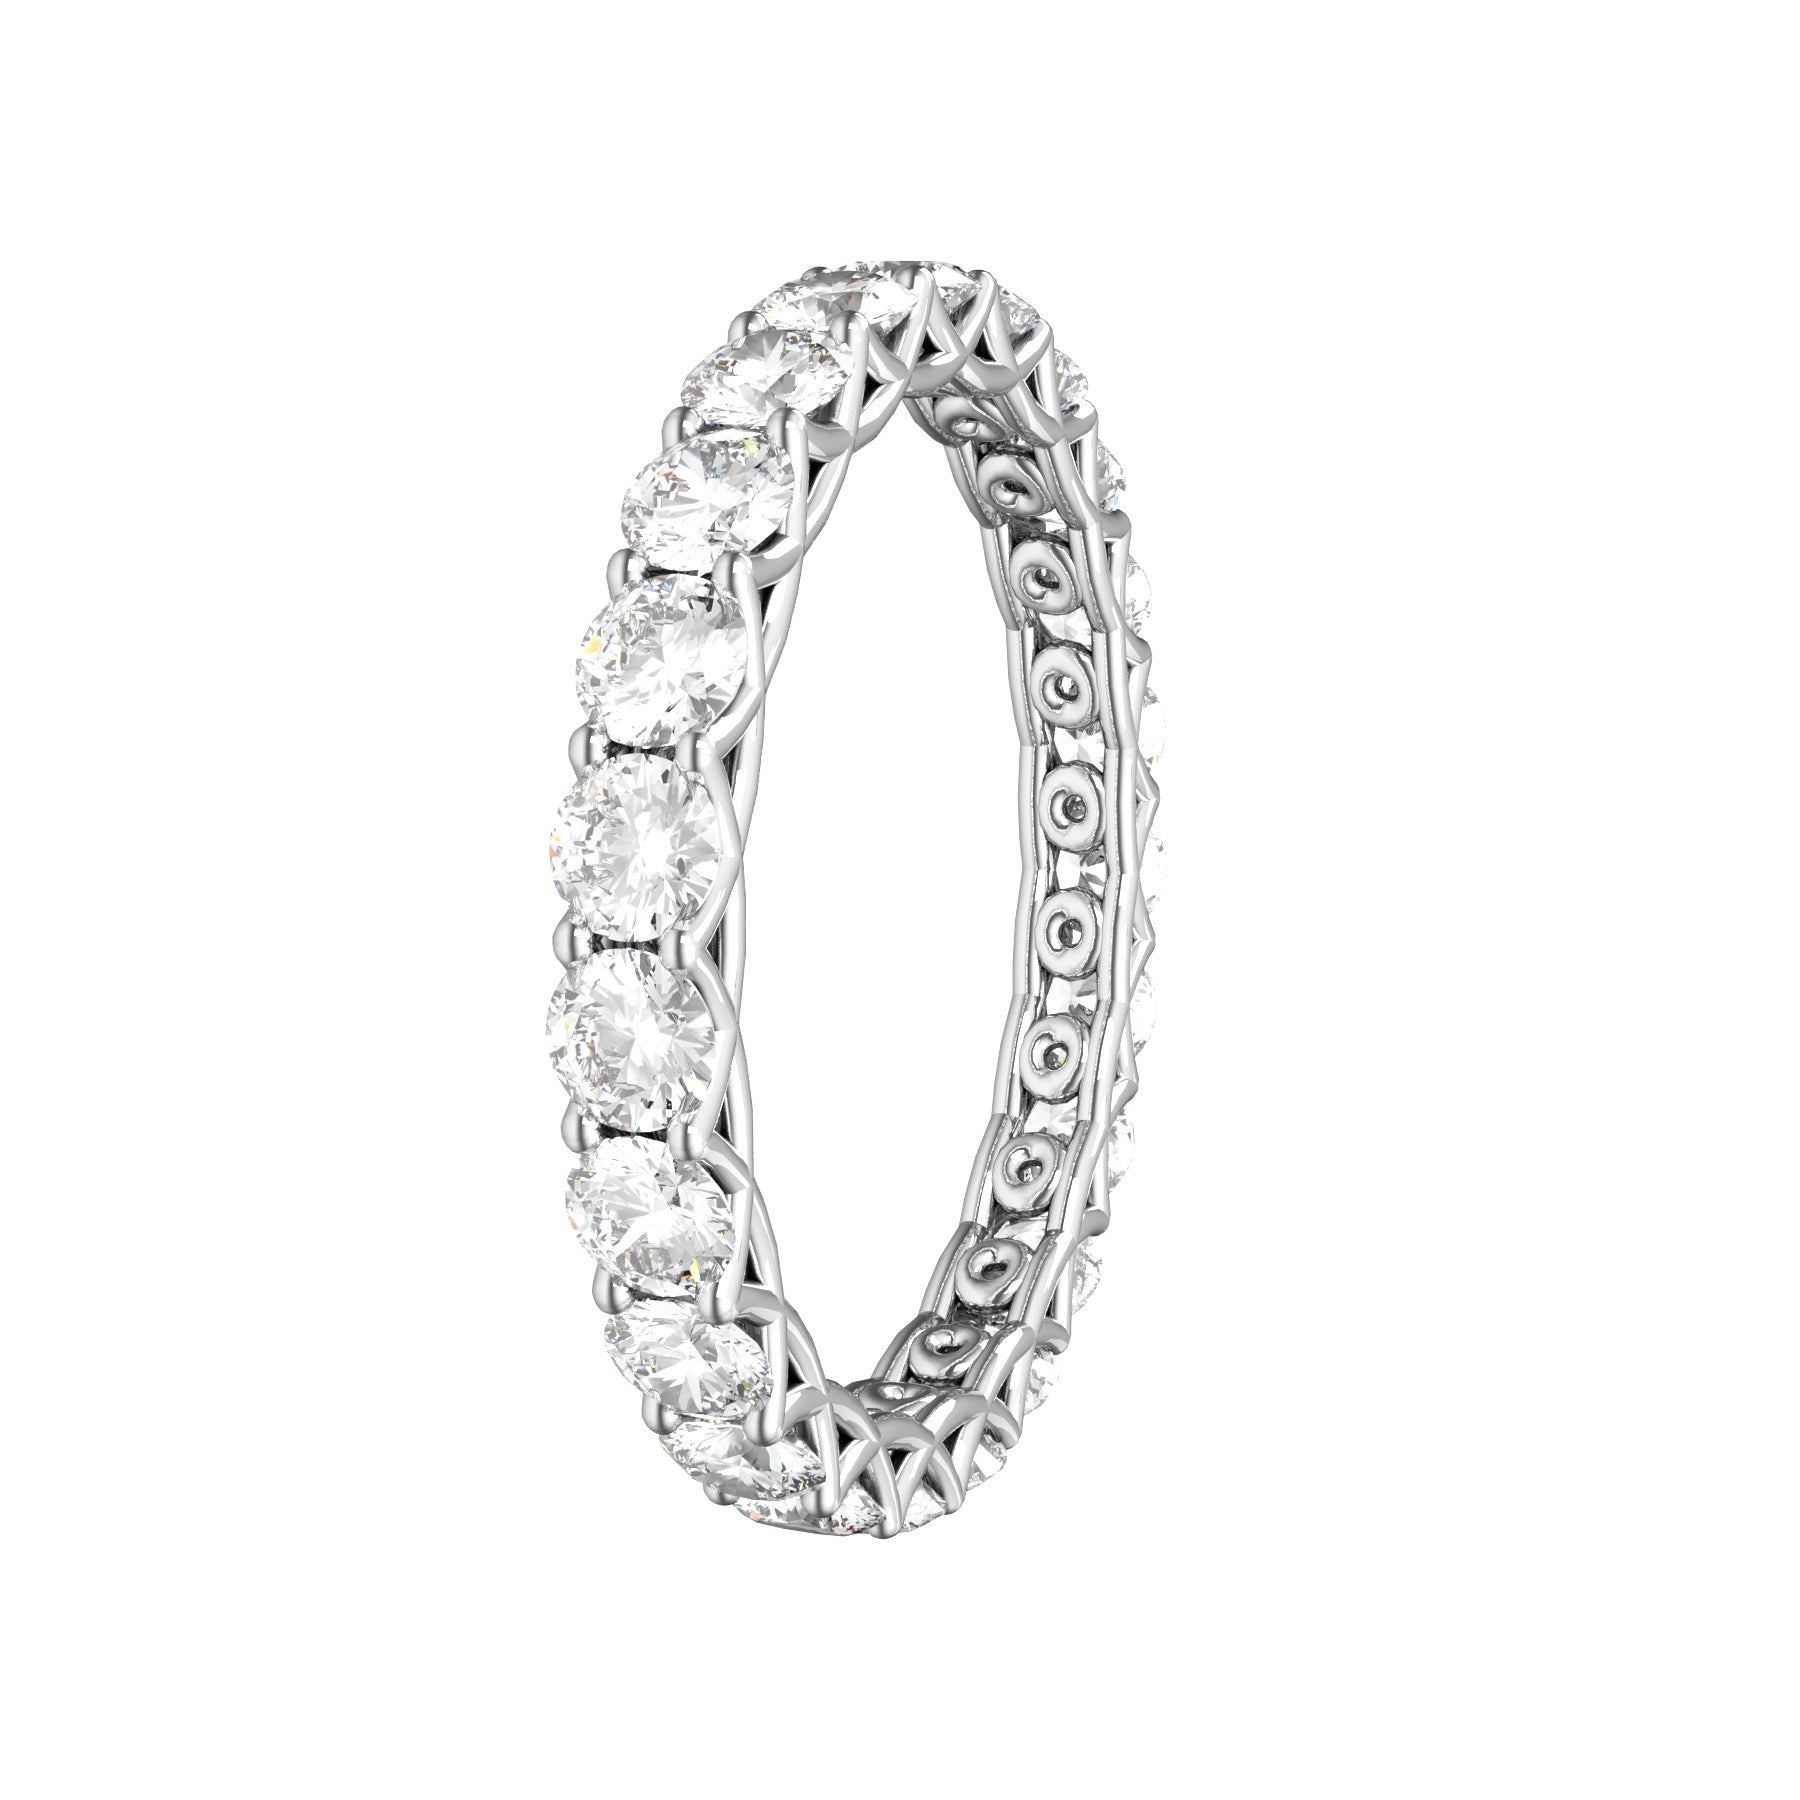 sweet hearts wedding band, 18 K white gold, 0,07 natural diamonds, weight about 1,50 g. (0.05 oz), width 2,65 mm